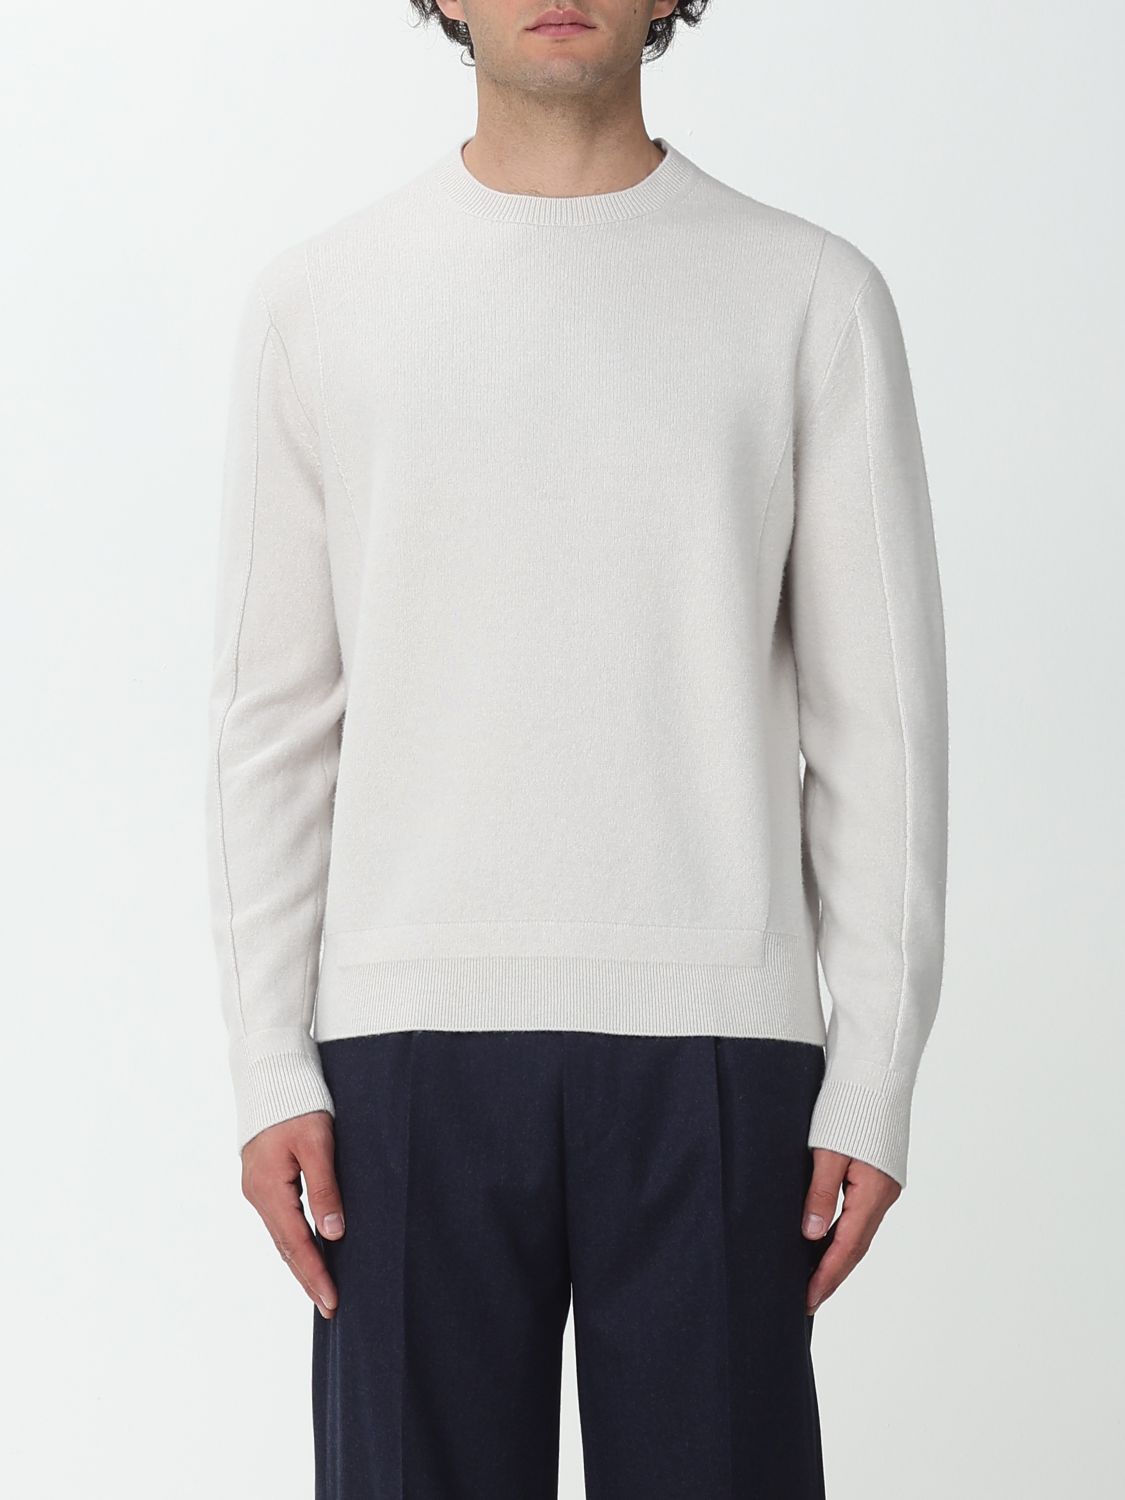 Zegna Sweater In Wool And Cashmere In White